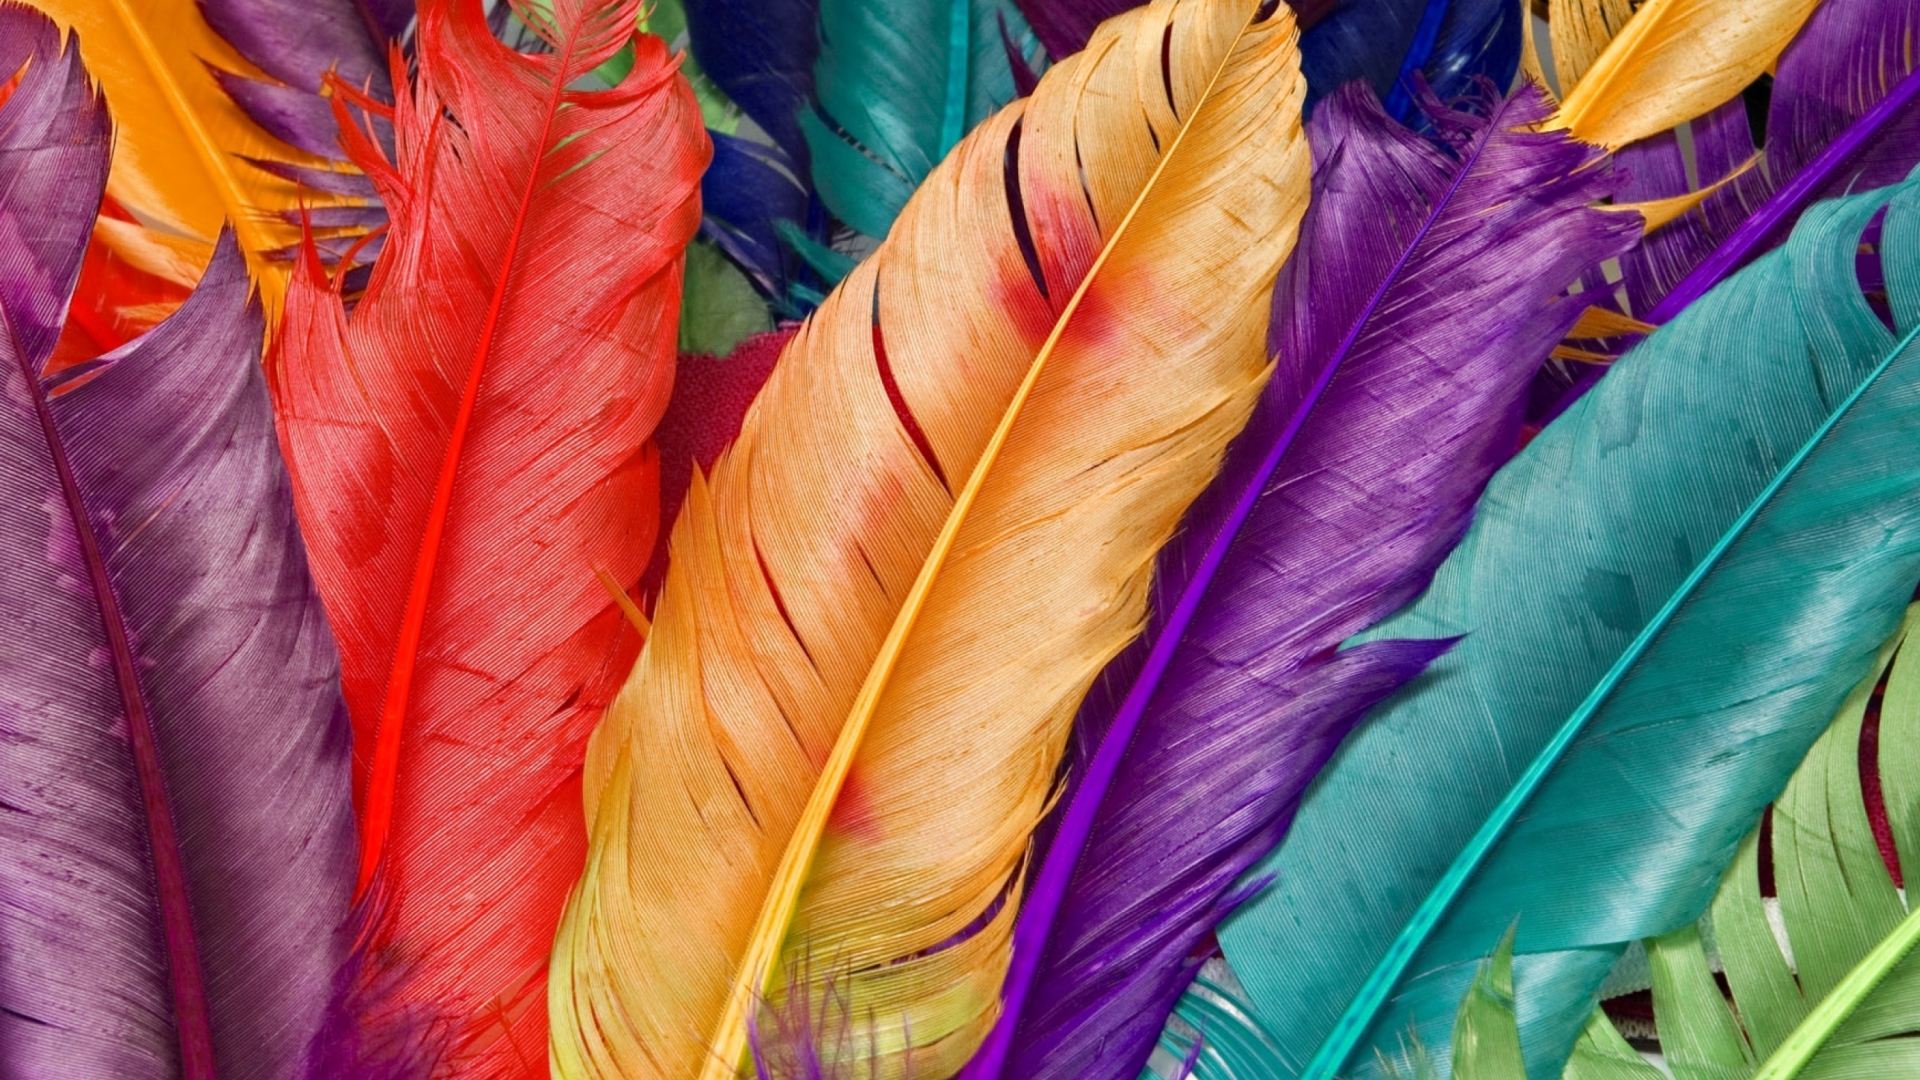 Colored Feathers wallpaper 1920x1080